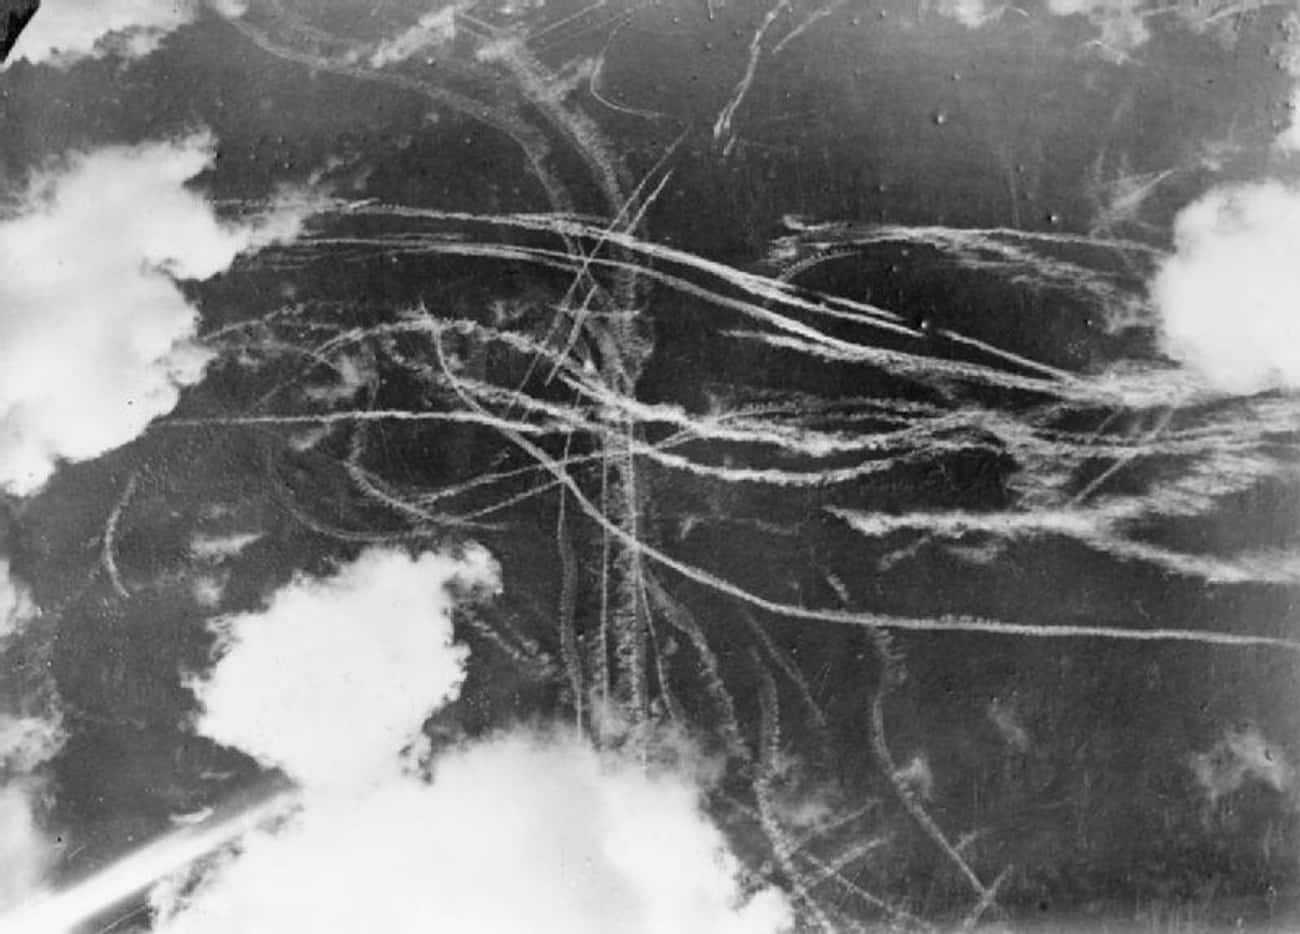 The Sky Over The United Kingdom After A 1940 Battle